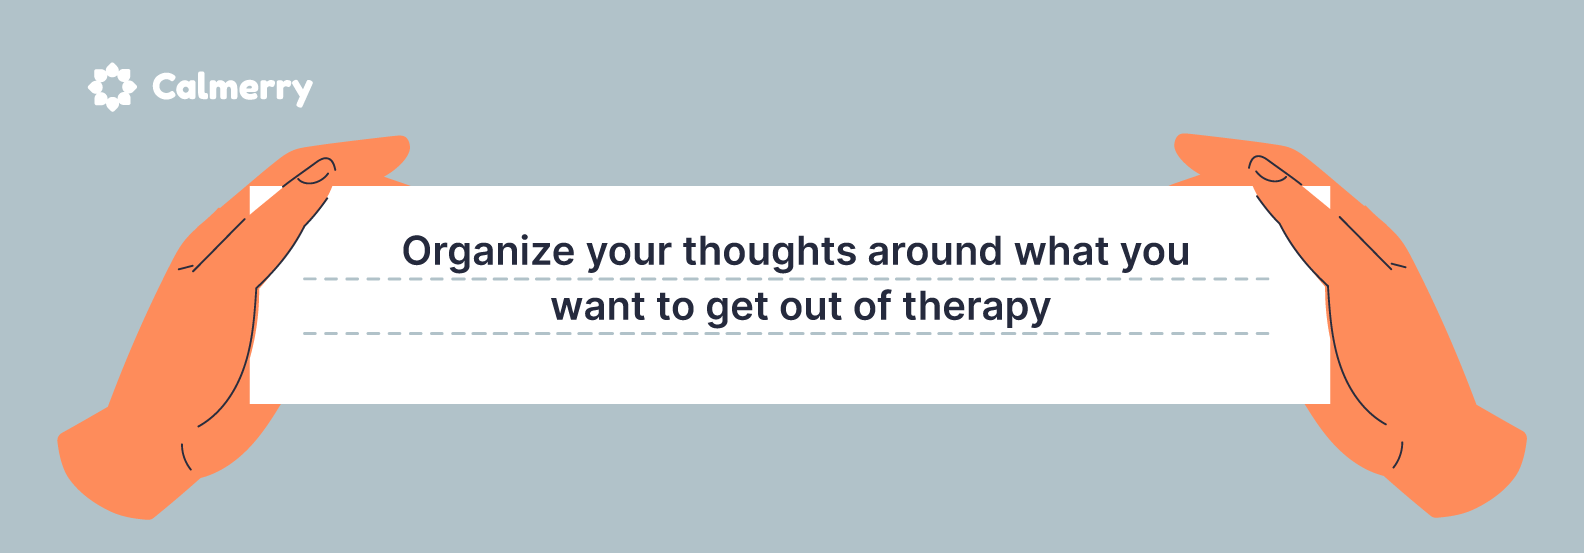 Organize your thoughts around what you want to get out of therapy